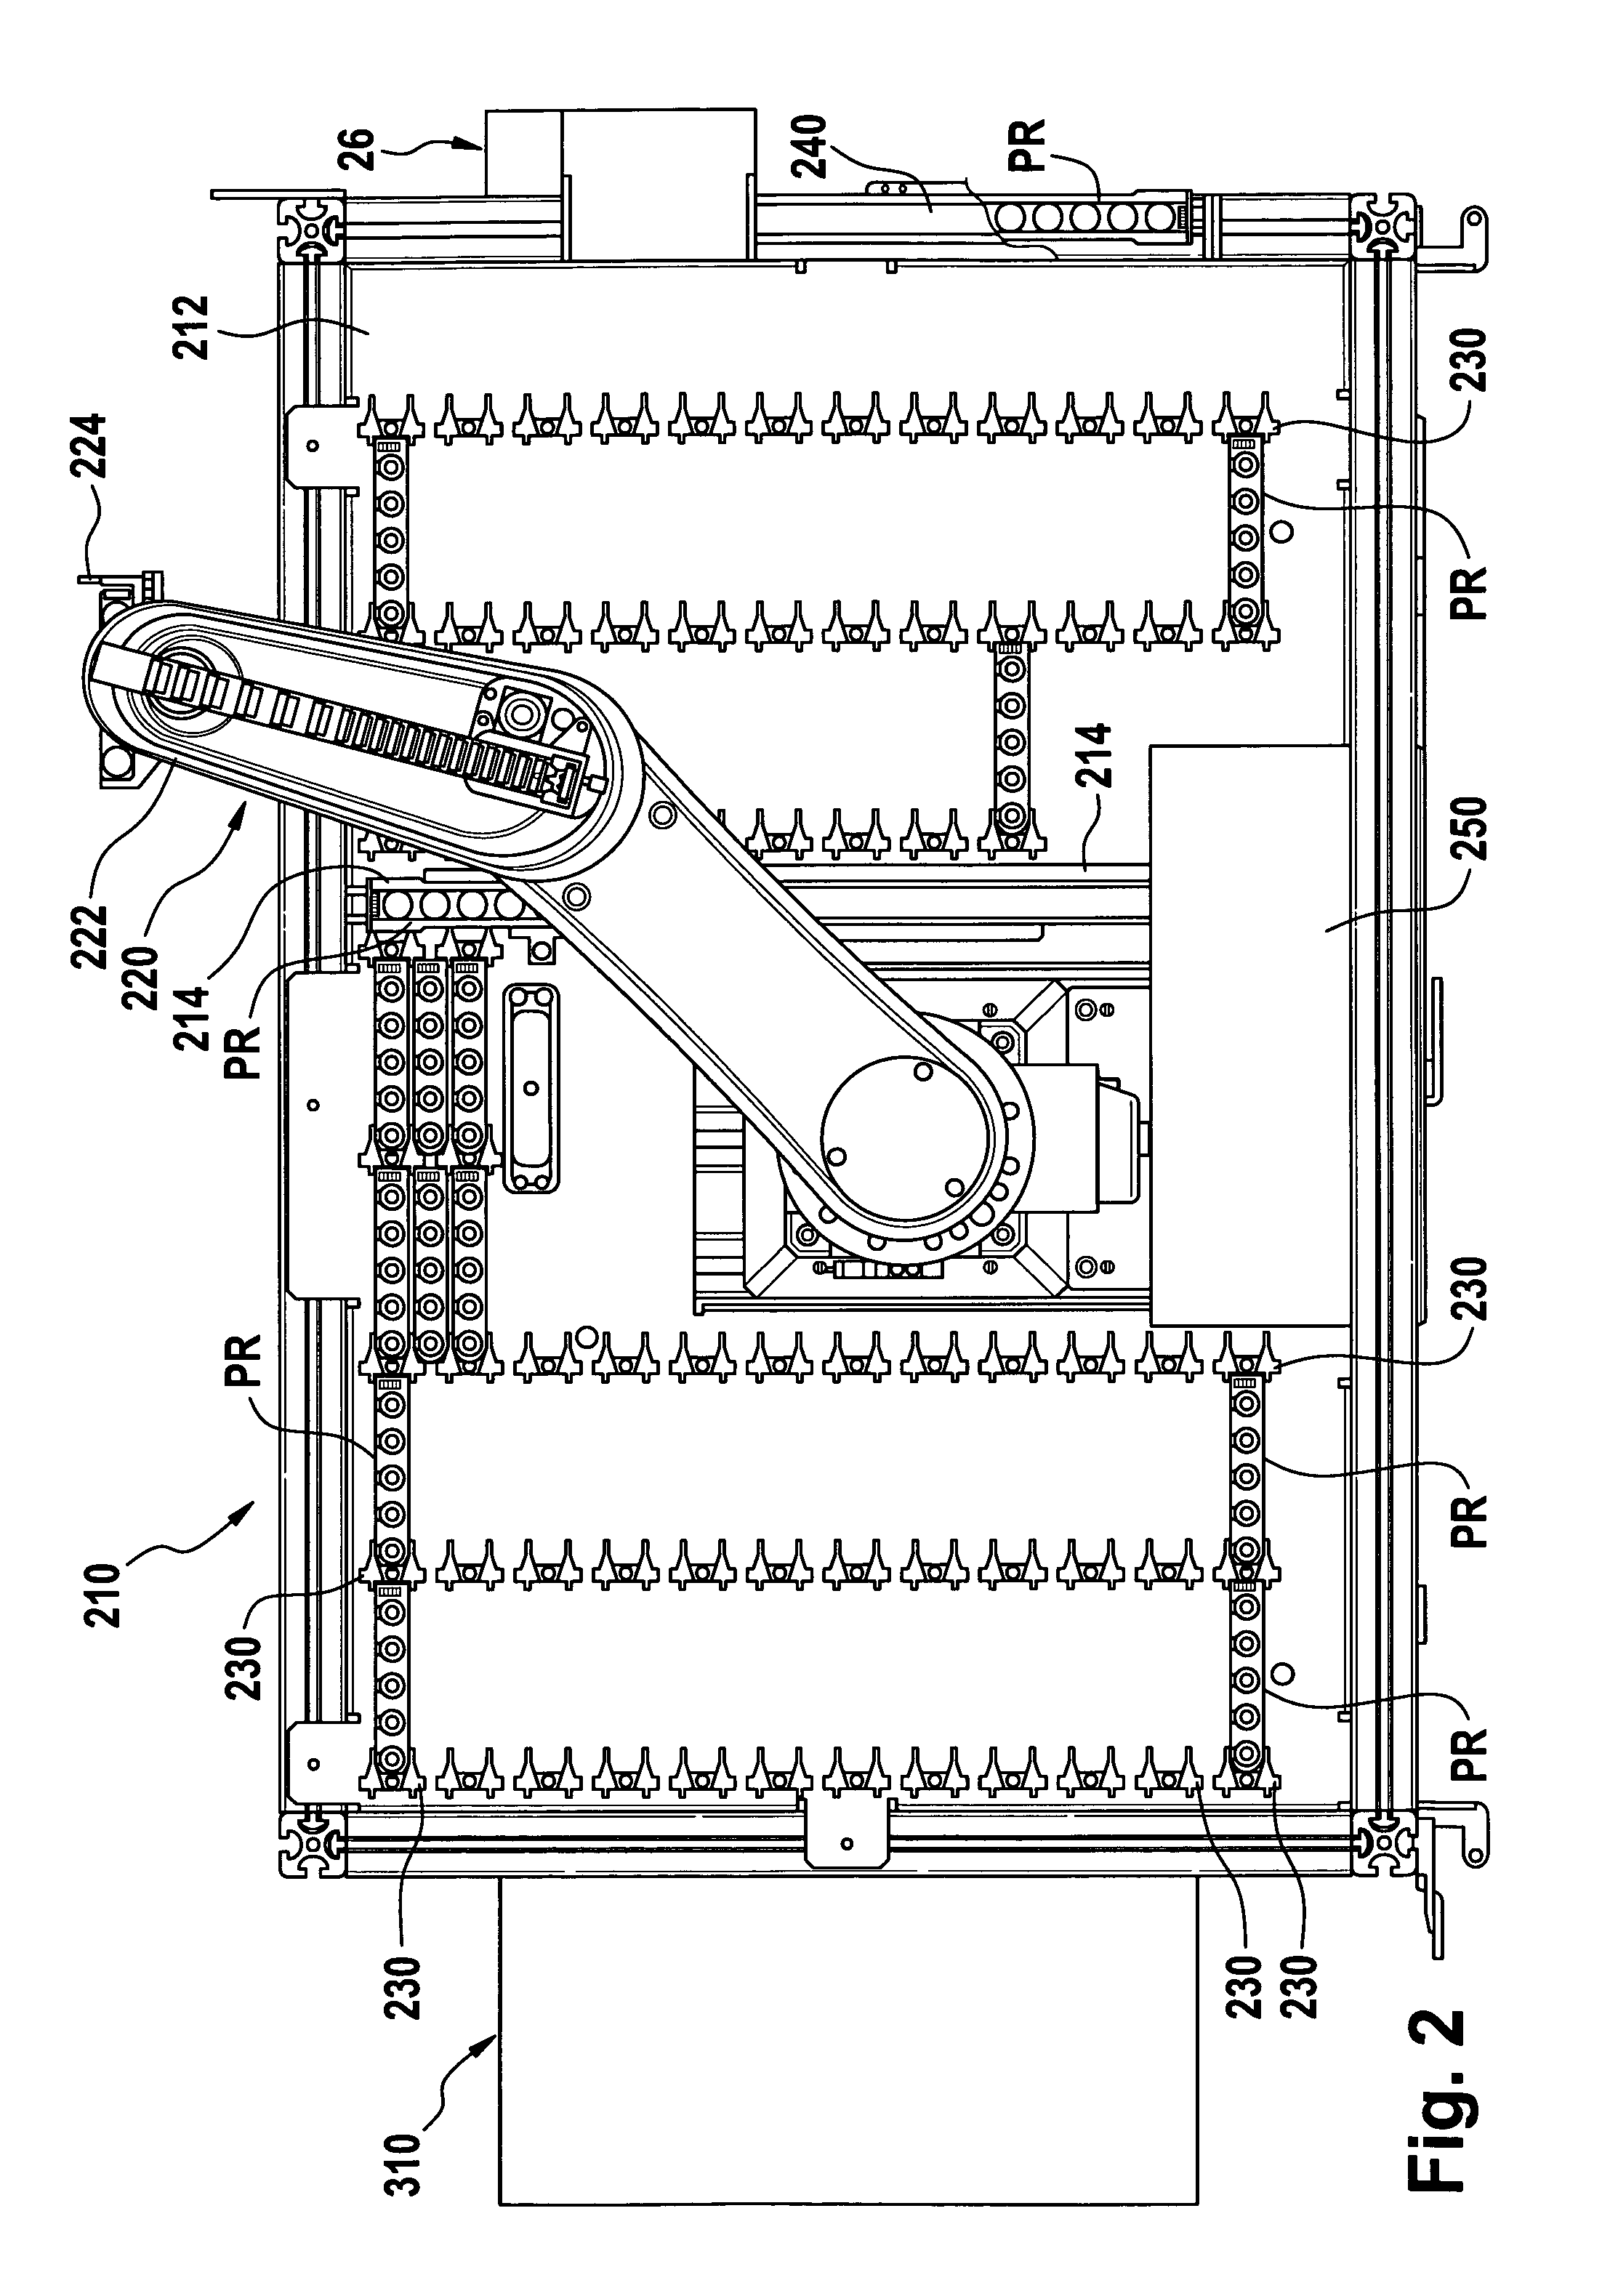 Laboratory storage and retrieval system and a method to handle laboratory sample tubes